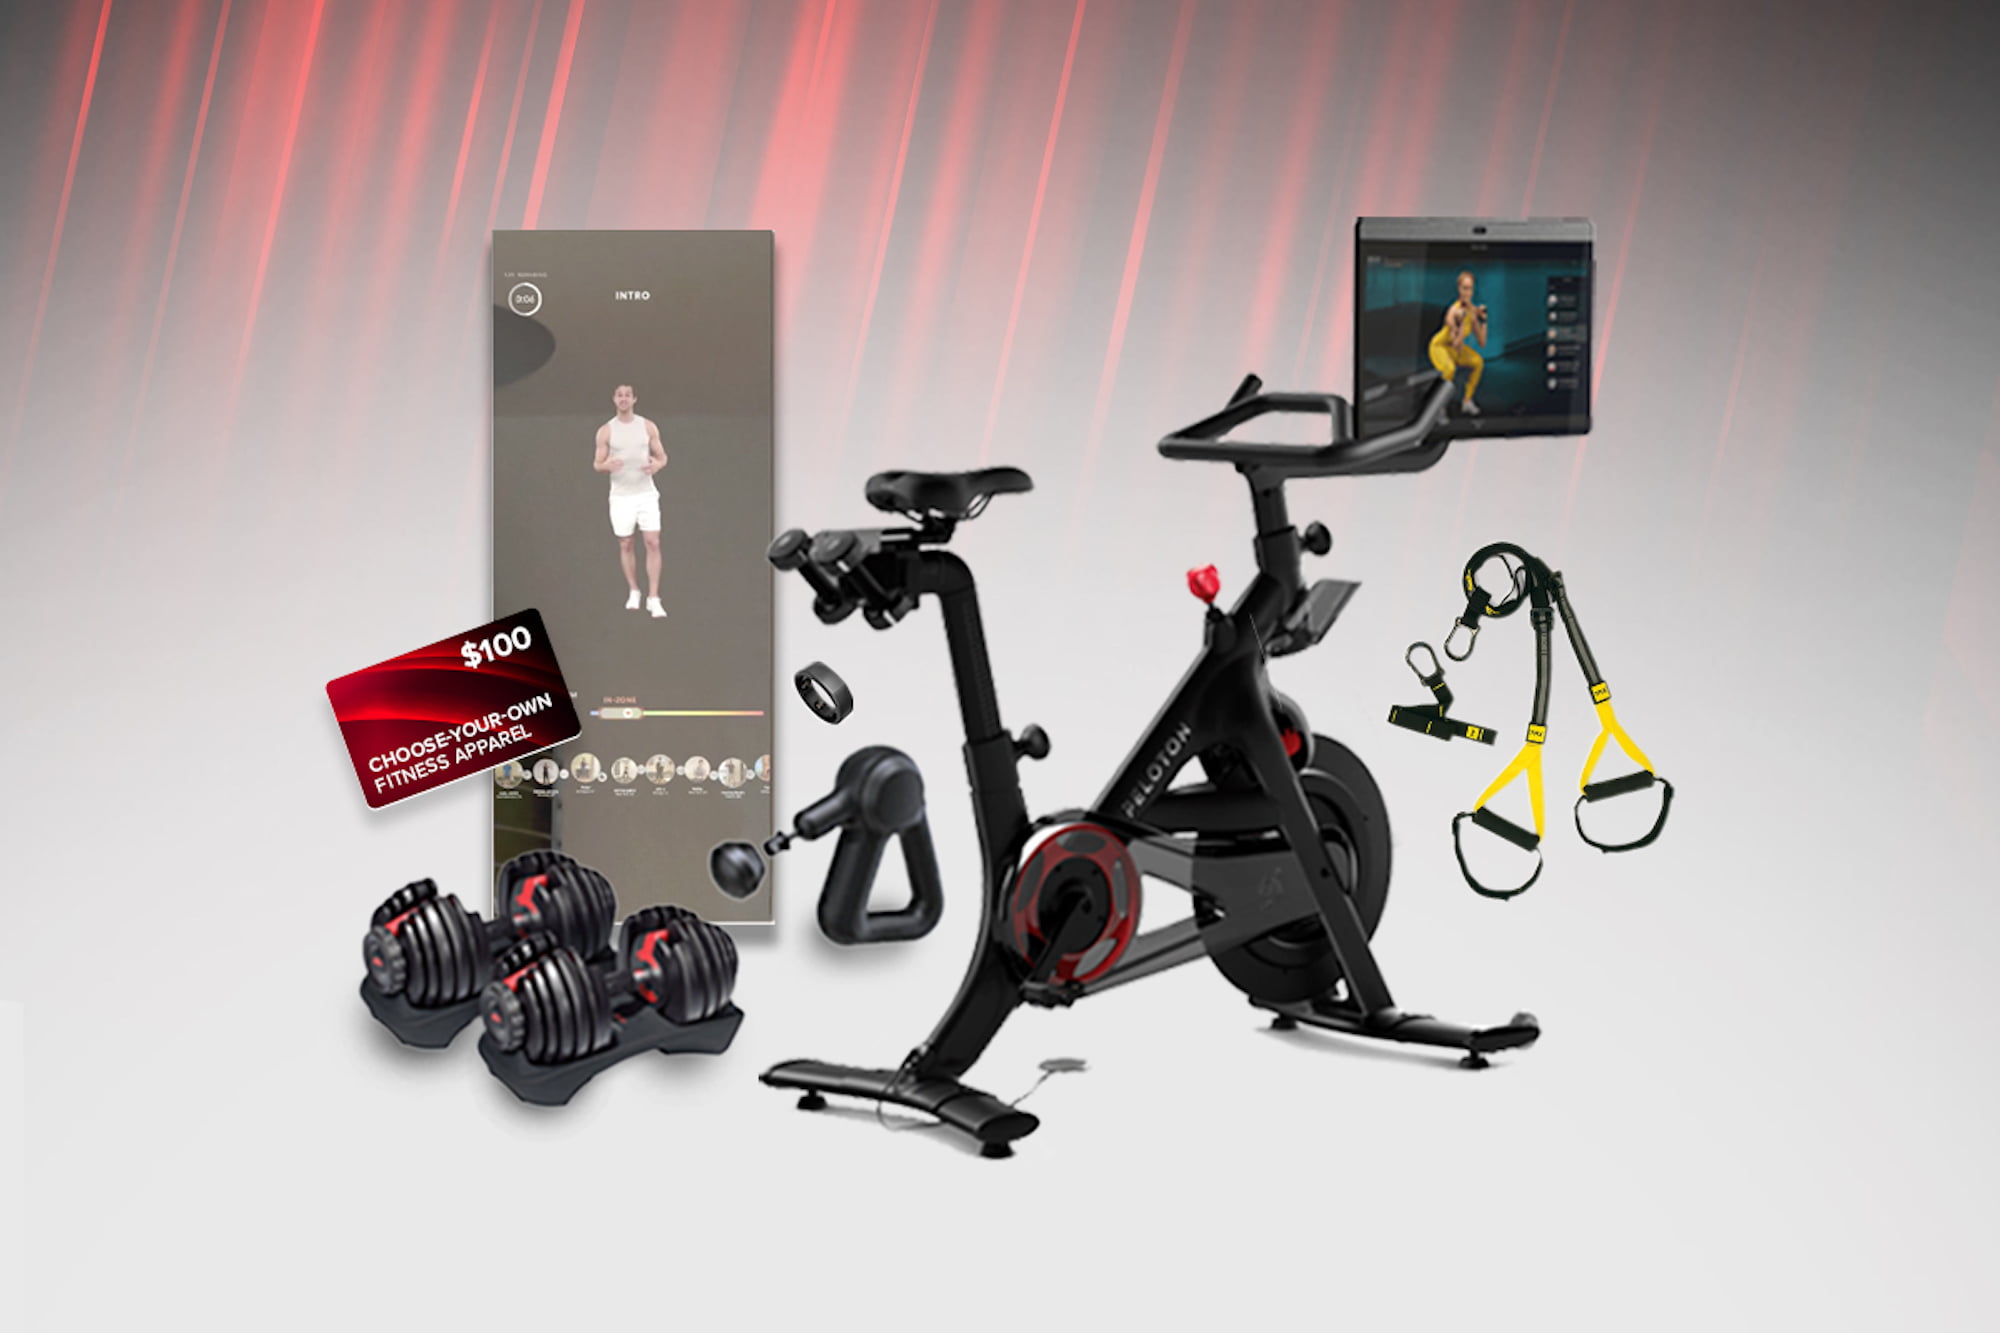 End The Year By Winning $5,000 Worth of Gym Gear, Including a Peloton